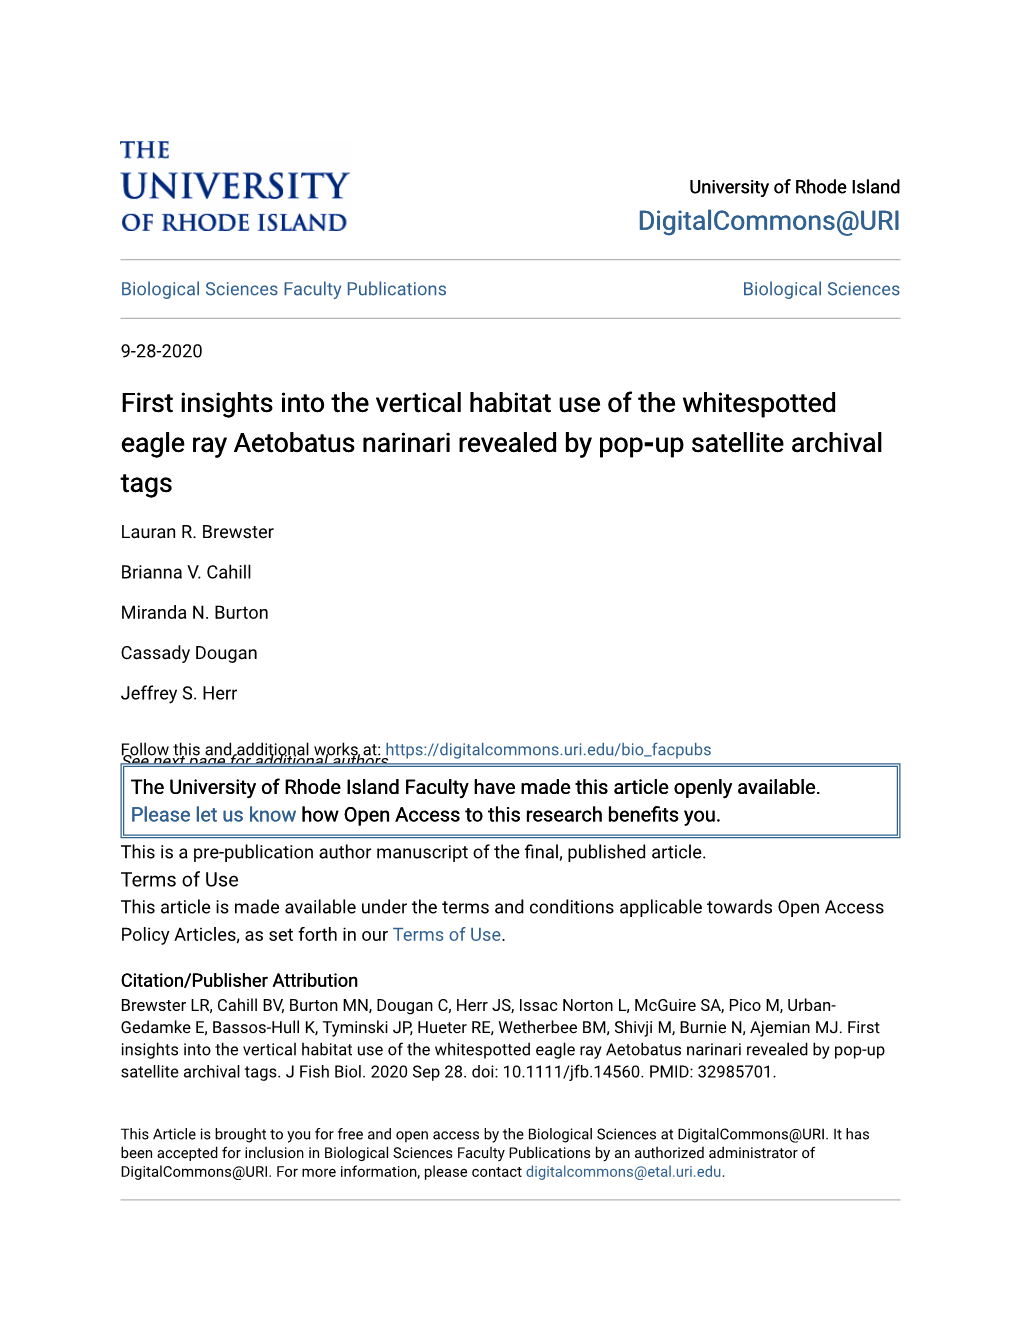 First Insights Into the Vertical Habitat Use of the Whitespotted Eagle Ray Aetobatus Narinari Revealed by Pop‐Up Satellite Archival Tags